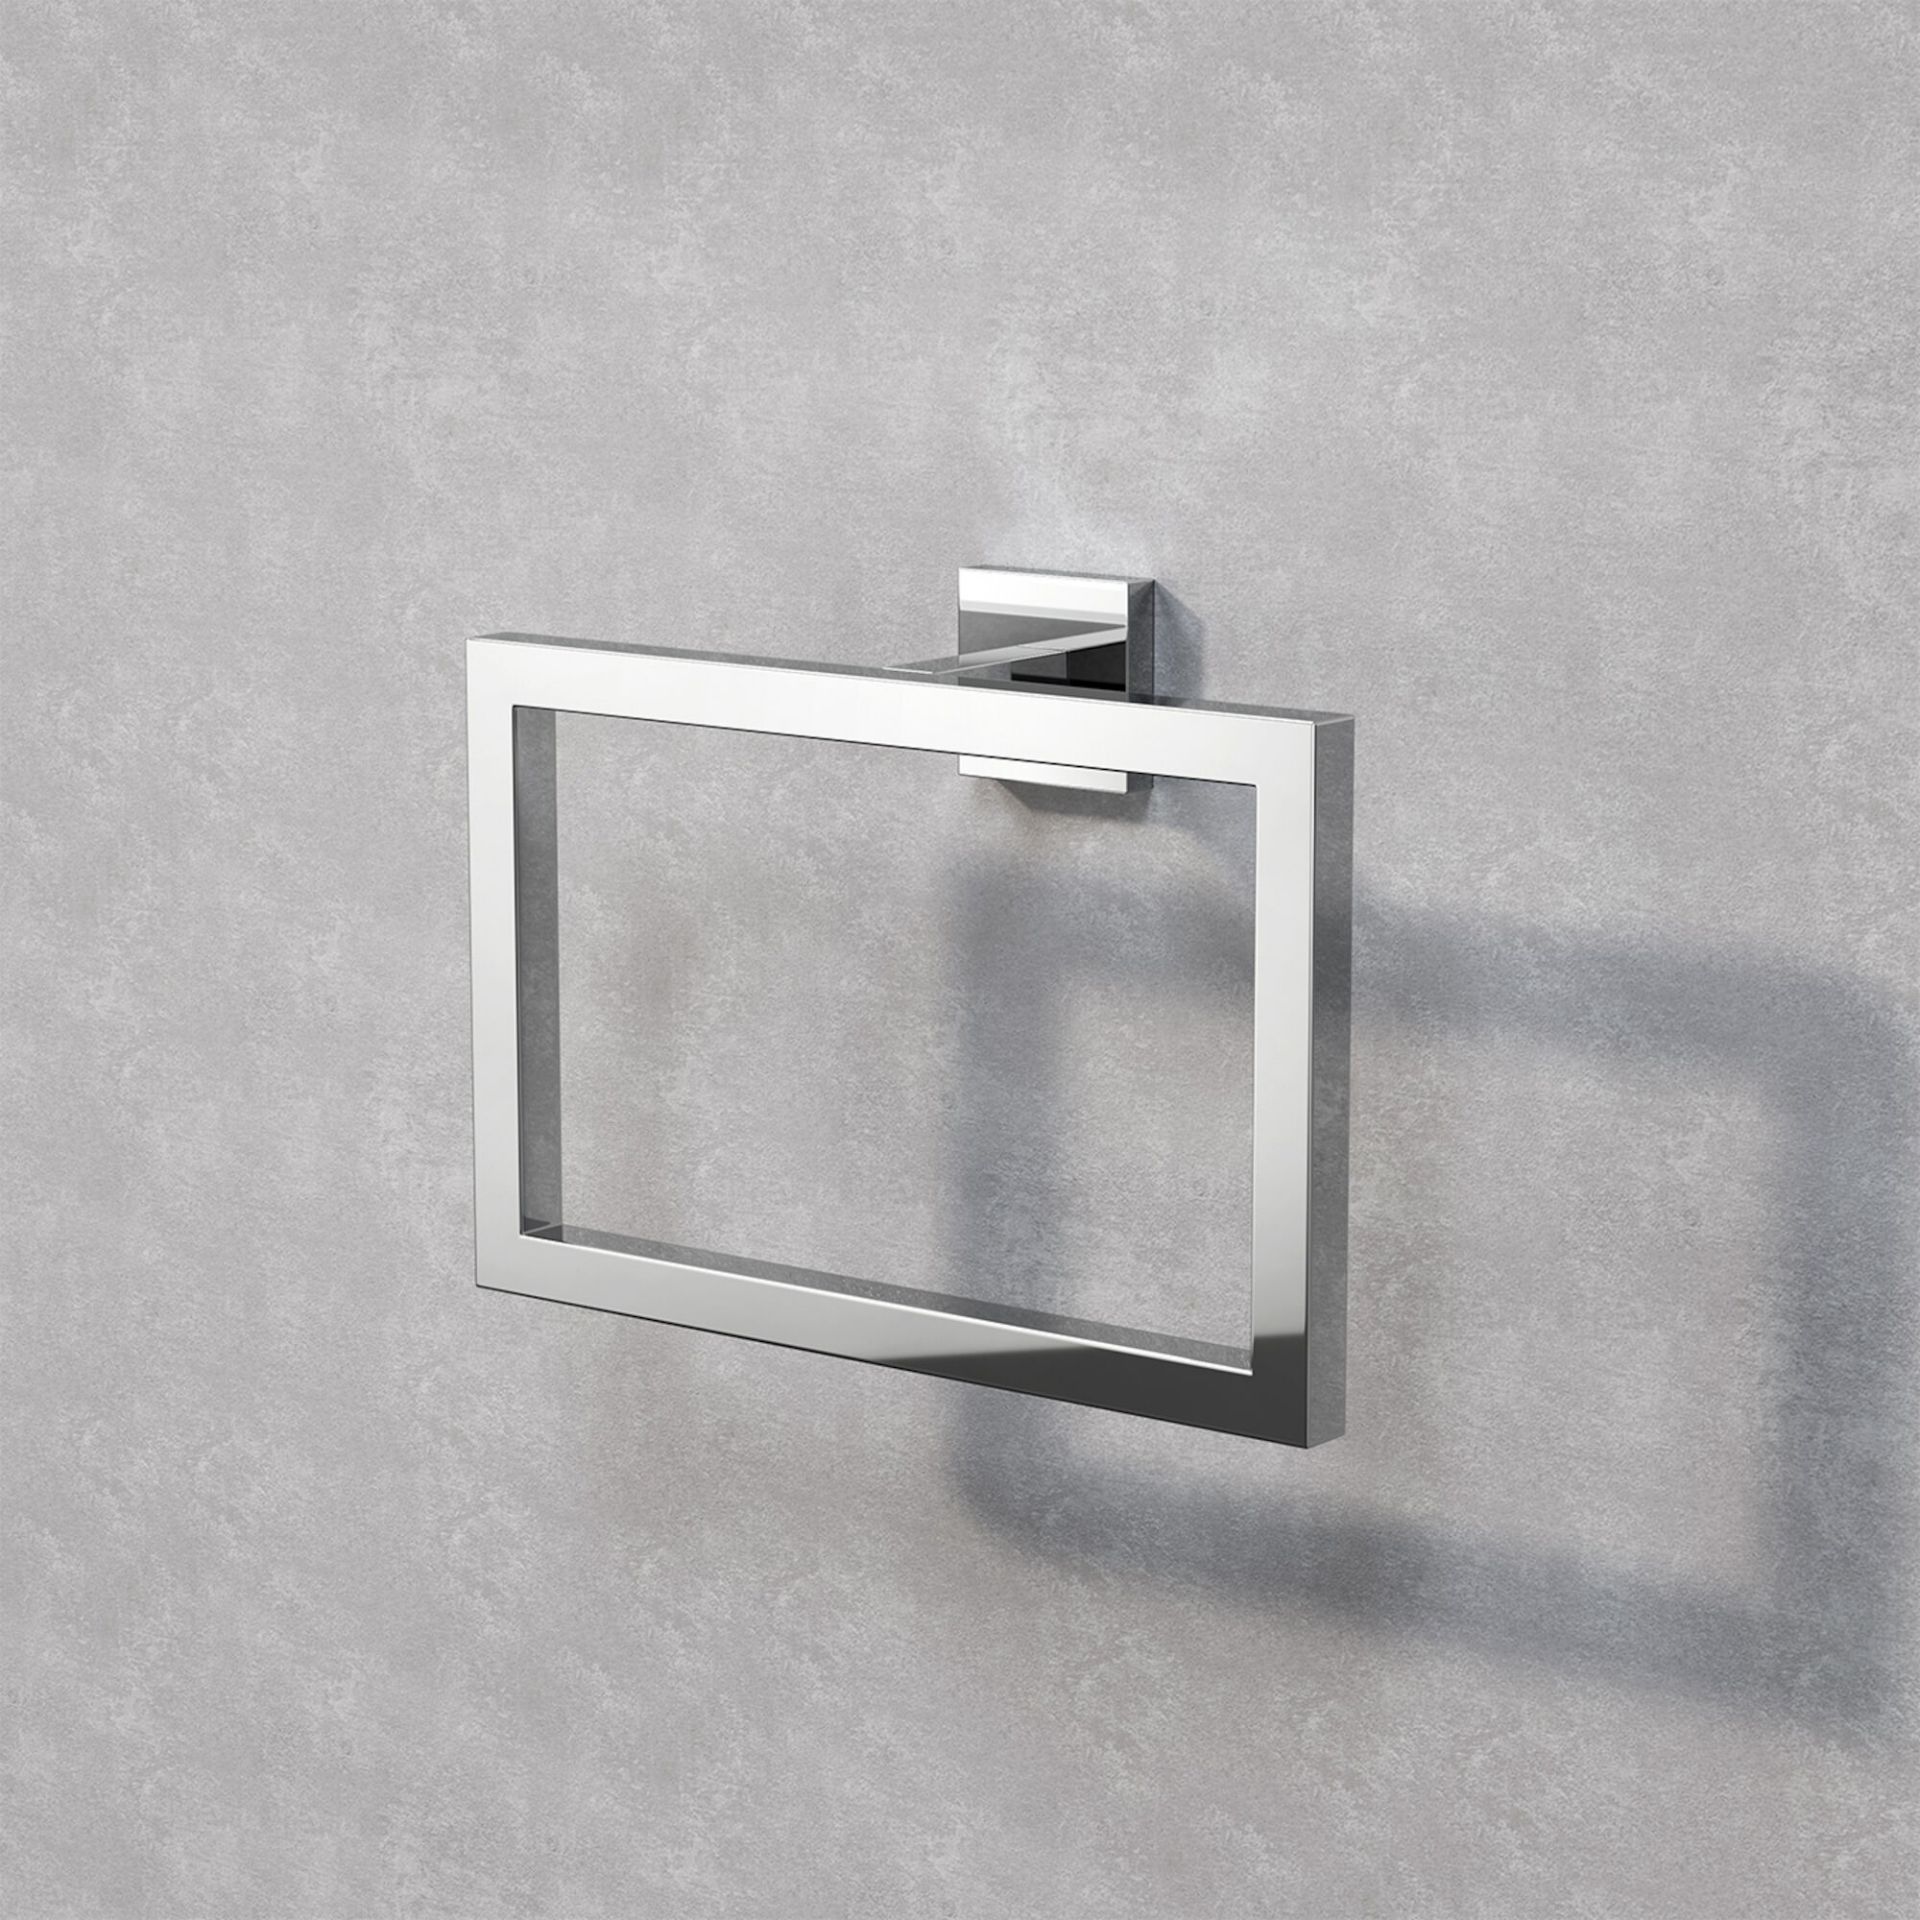 (SH1024) Jesmond Towel Ring. Finishes your bathroom with a little extra functionality and style...